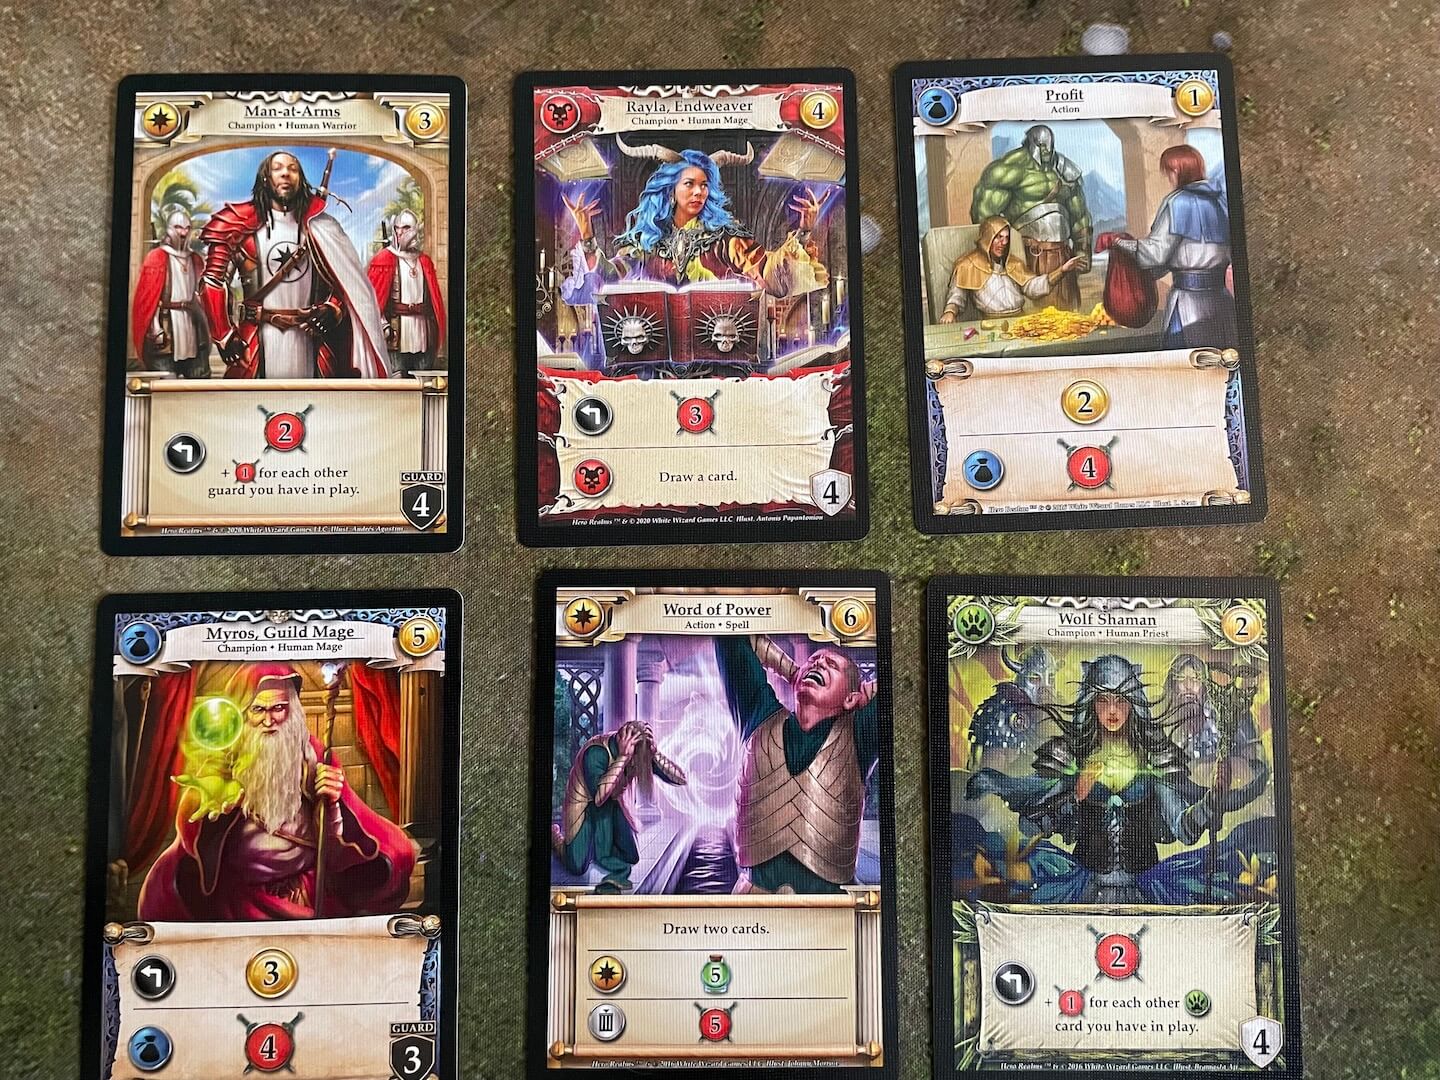 A sample of cards that can show up in the marketplace in Hero Realms